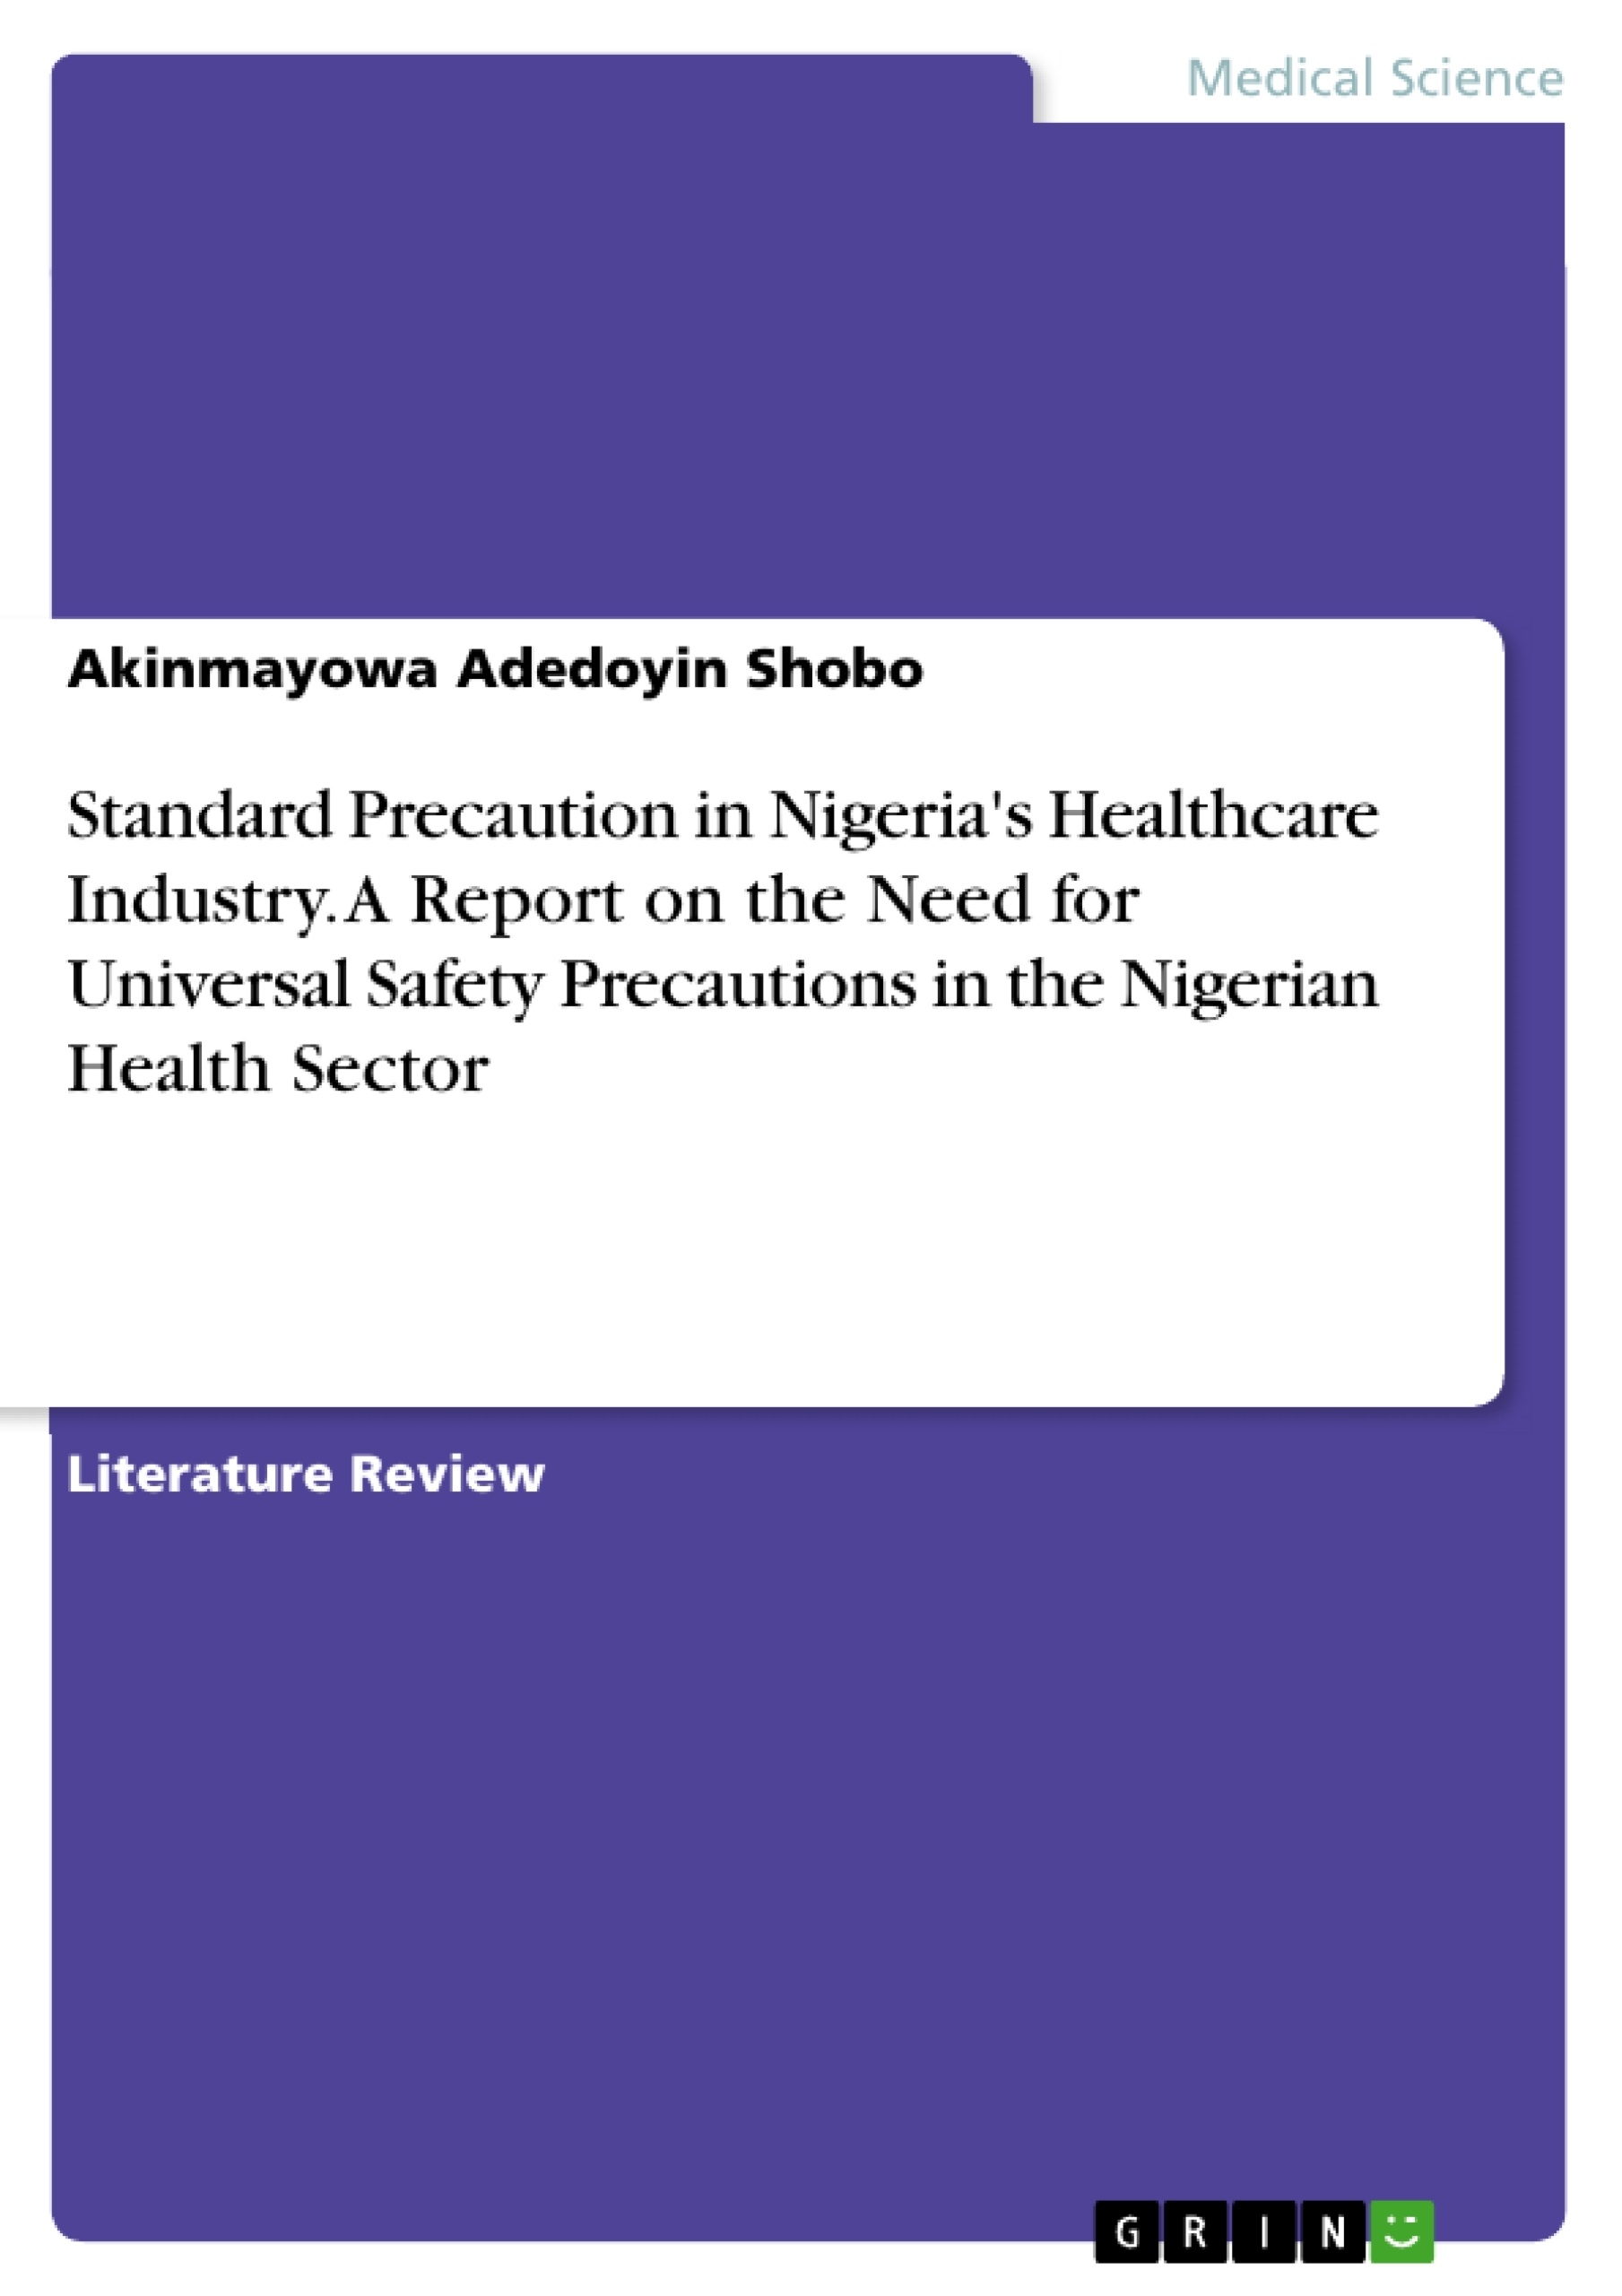 Title: Standard Precaution in Nigeria's Healthcare Industry. A Report on the Need for Universal Safety Precautions in the Nigerian Health Sector